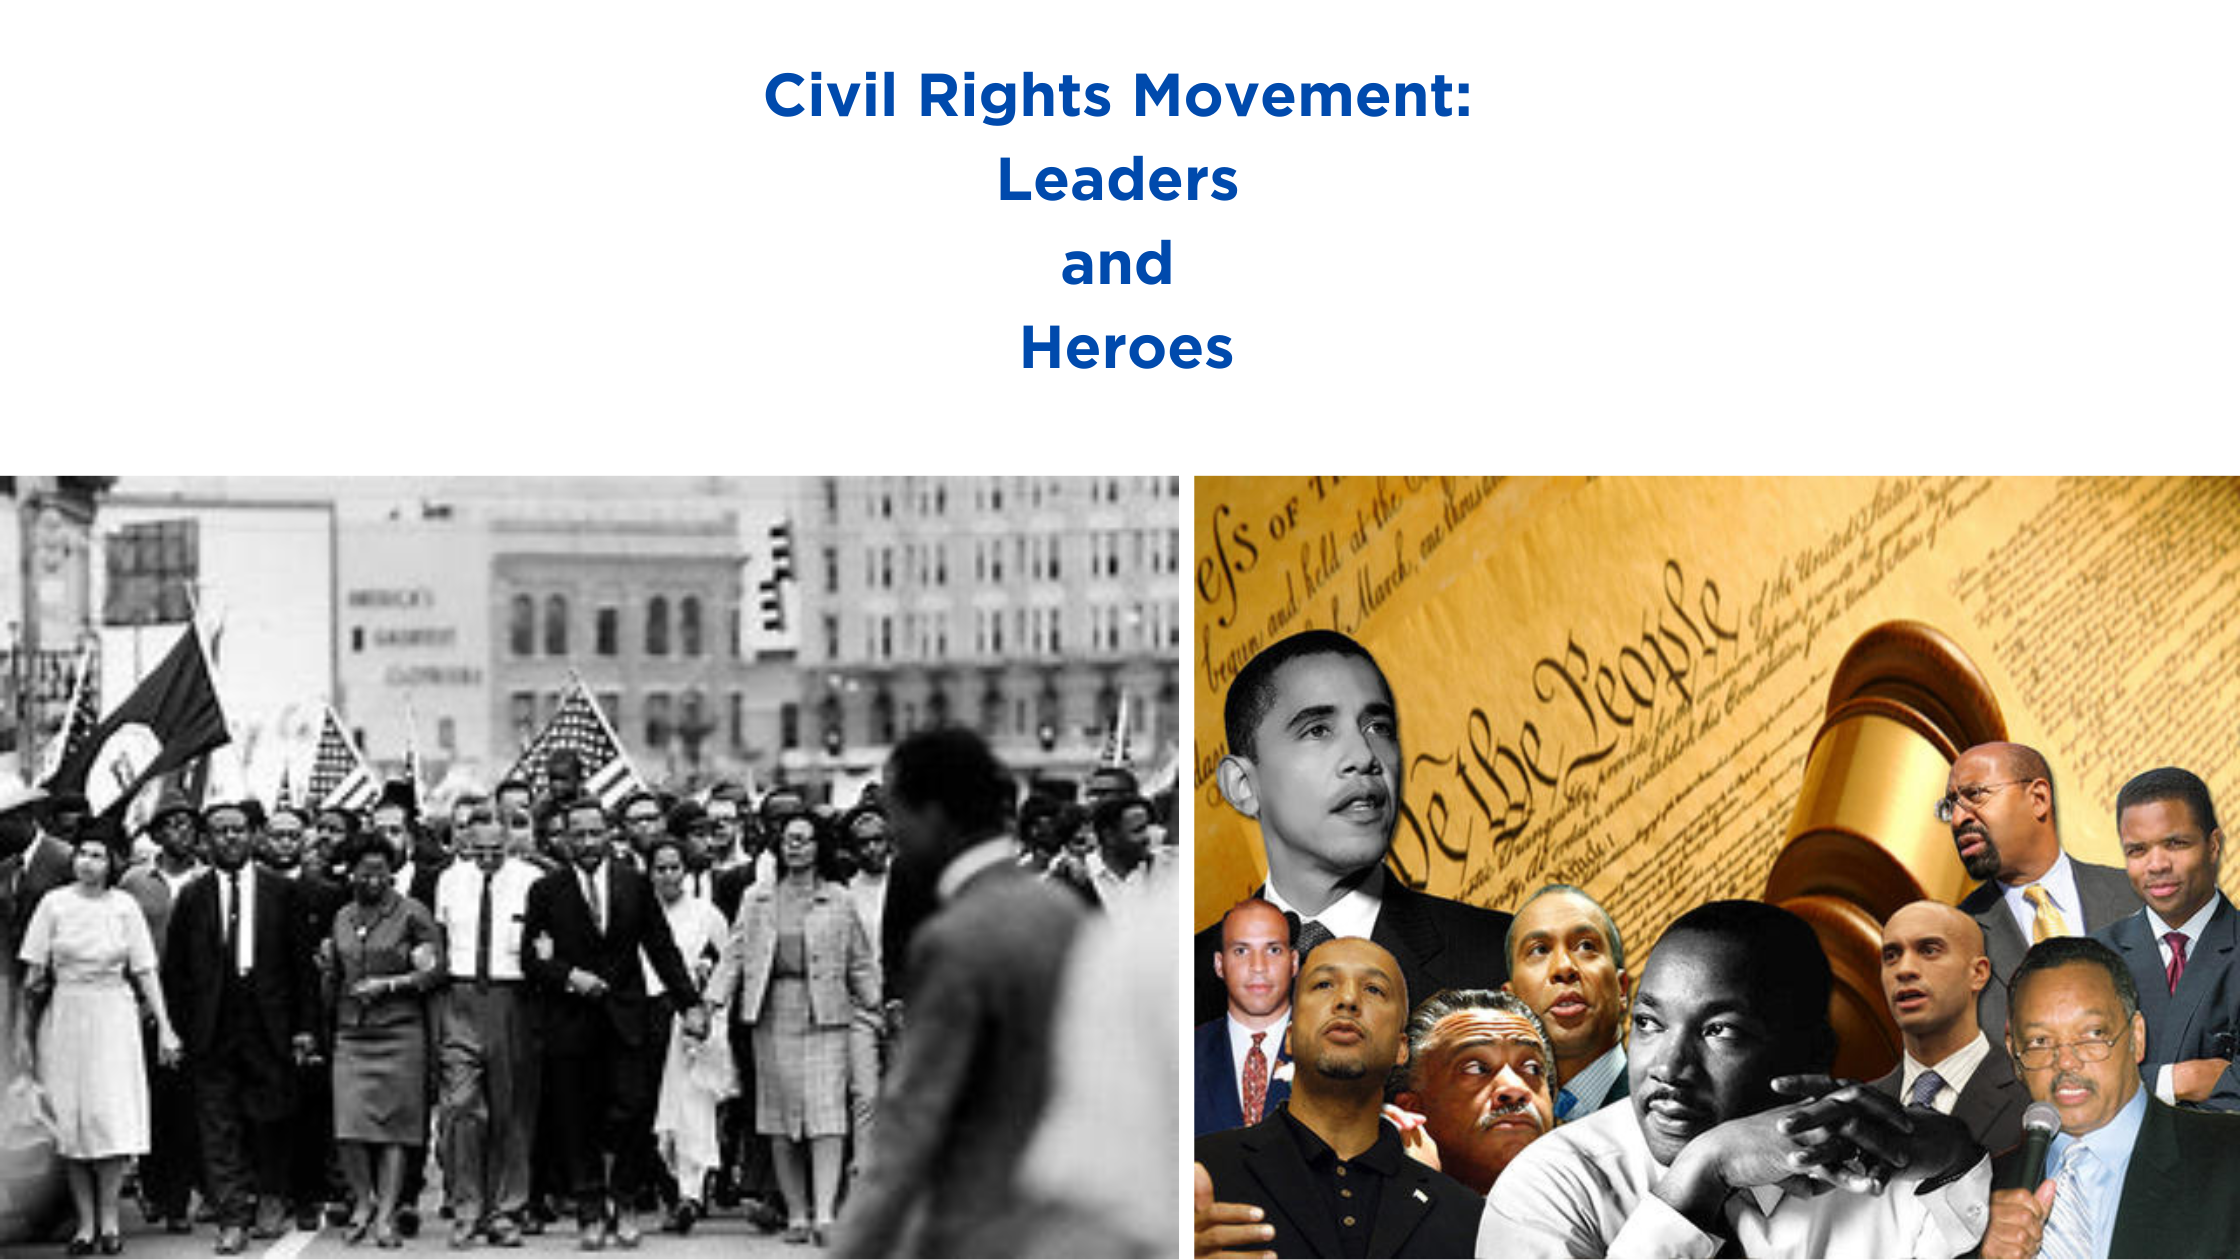 Civil Rights Movement leaders and heroes